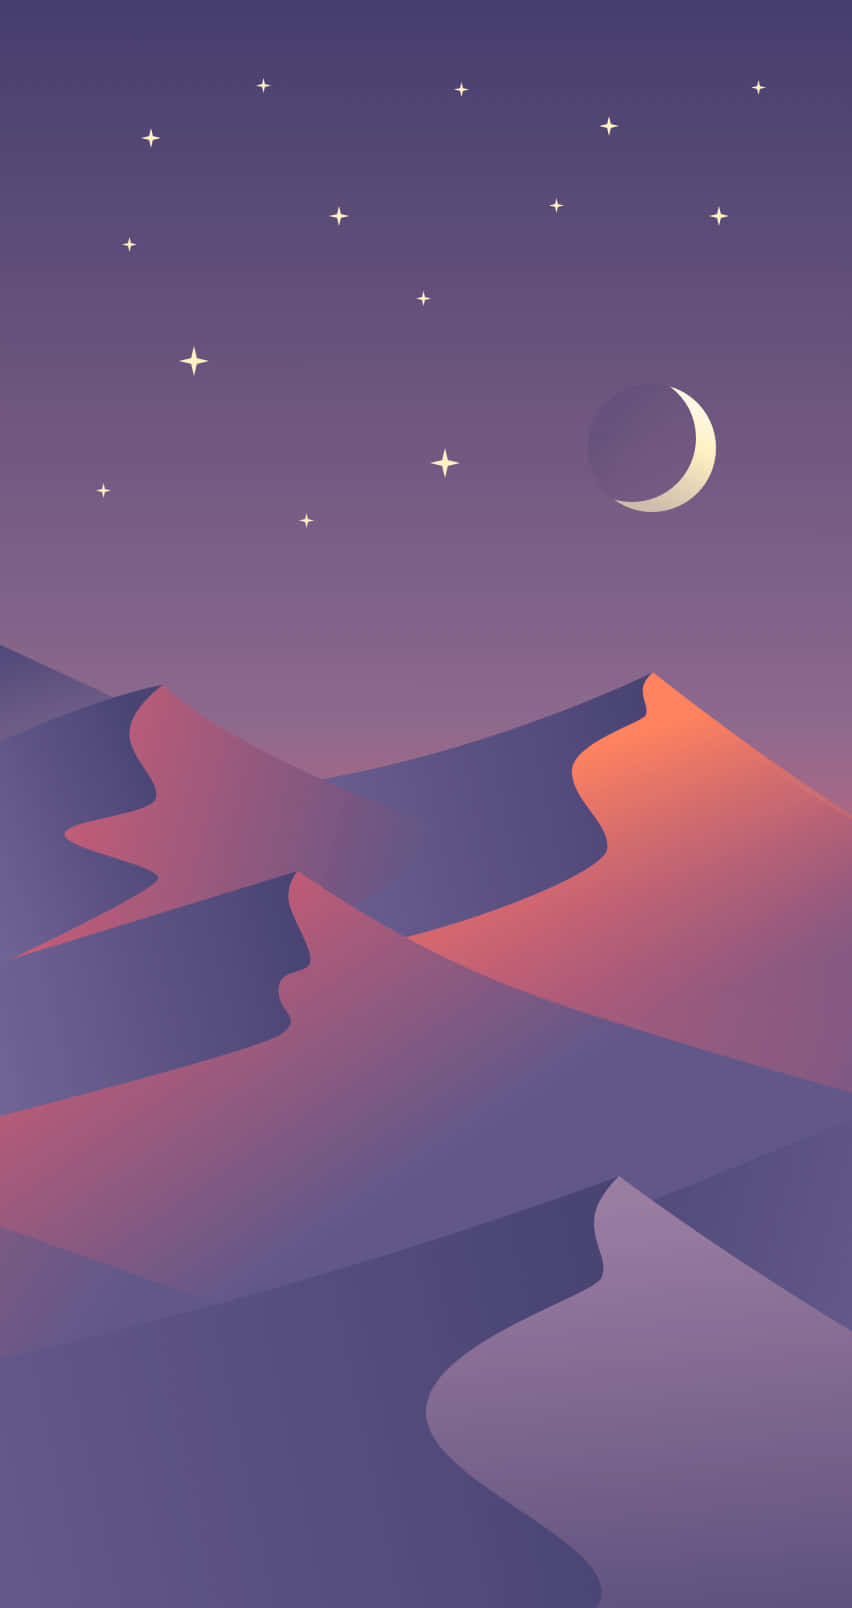 A Desert Landscape With A Moon And Stars